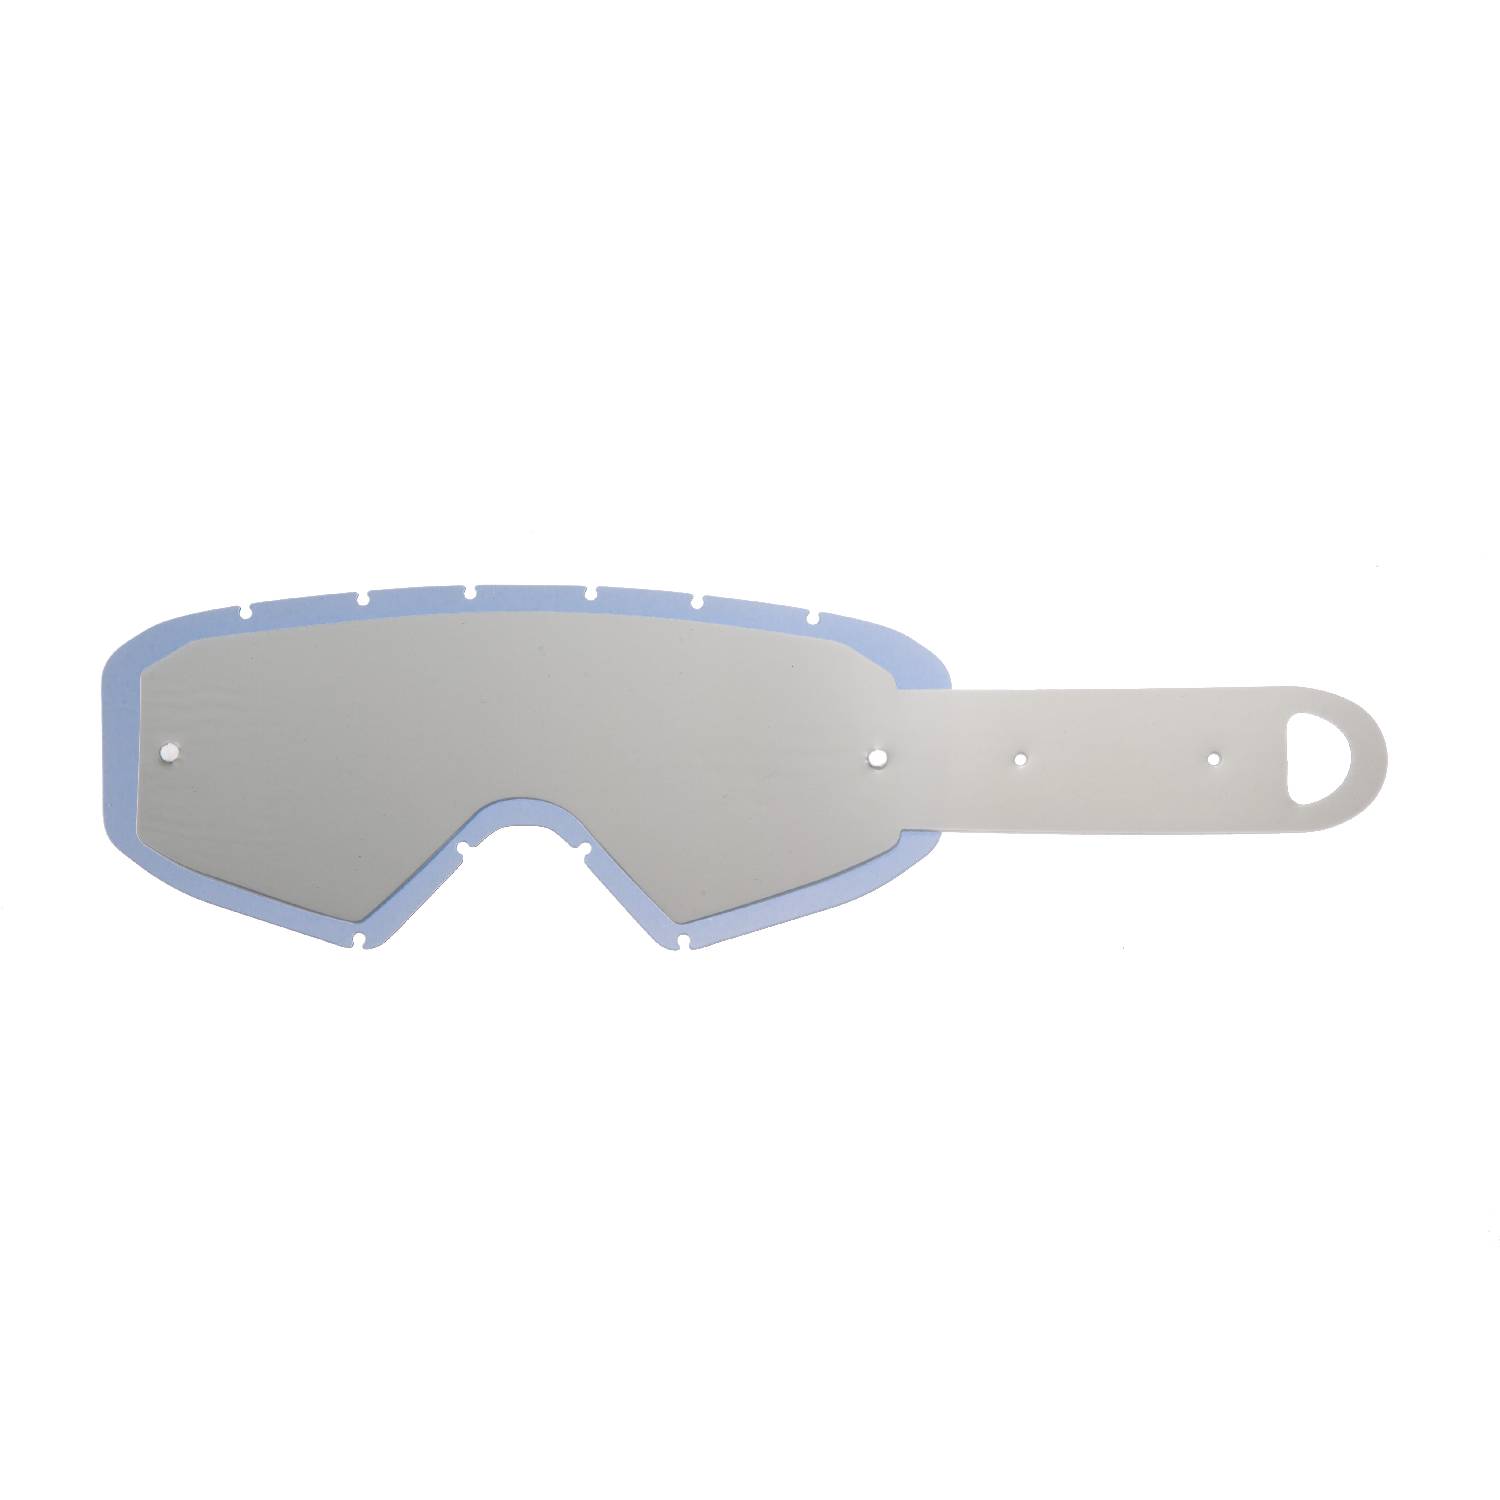 combo lenses with smokey lenses with 10 tear off compatible for Ethen Zerocinque Primis / R / Ares / Ares Pluma cross goggles / goggles